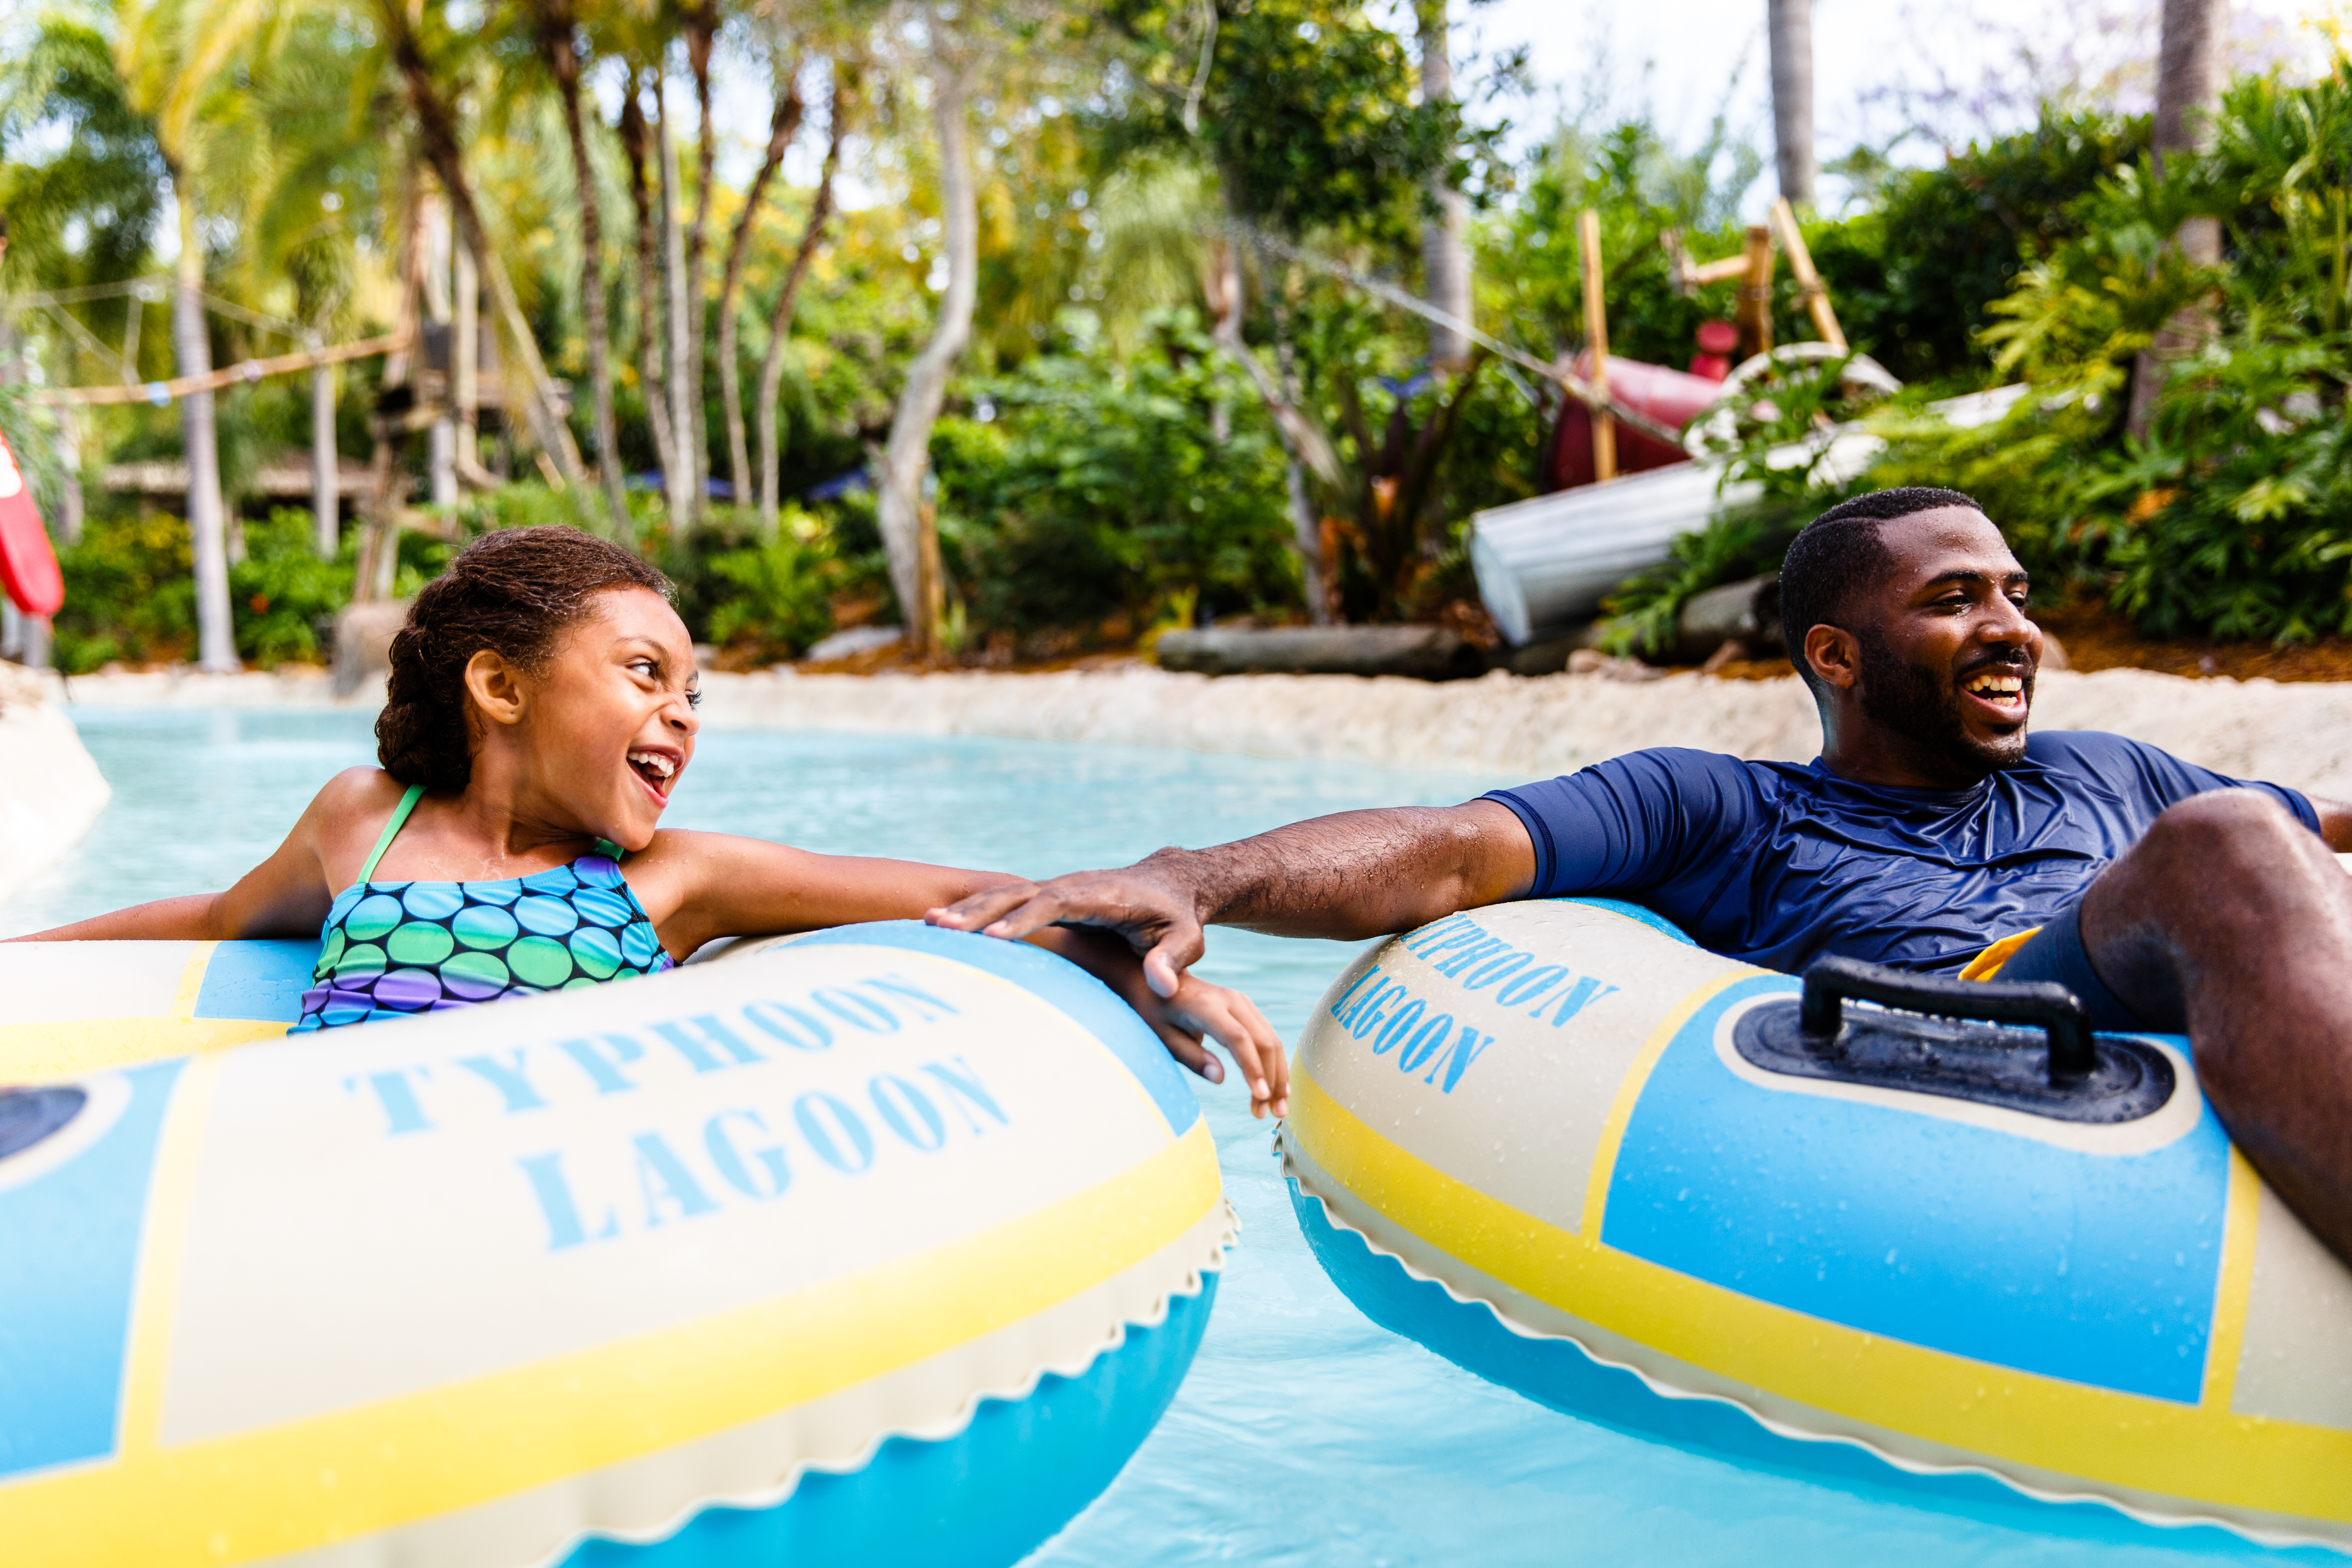 Father and daughter holding onto each other's lazy river tube as they float down the lazy river at Disney's Typhoon Lagoon Water Park.